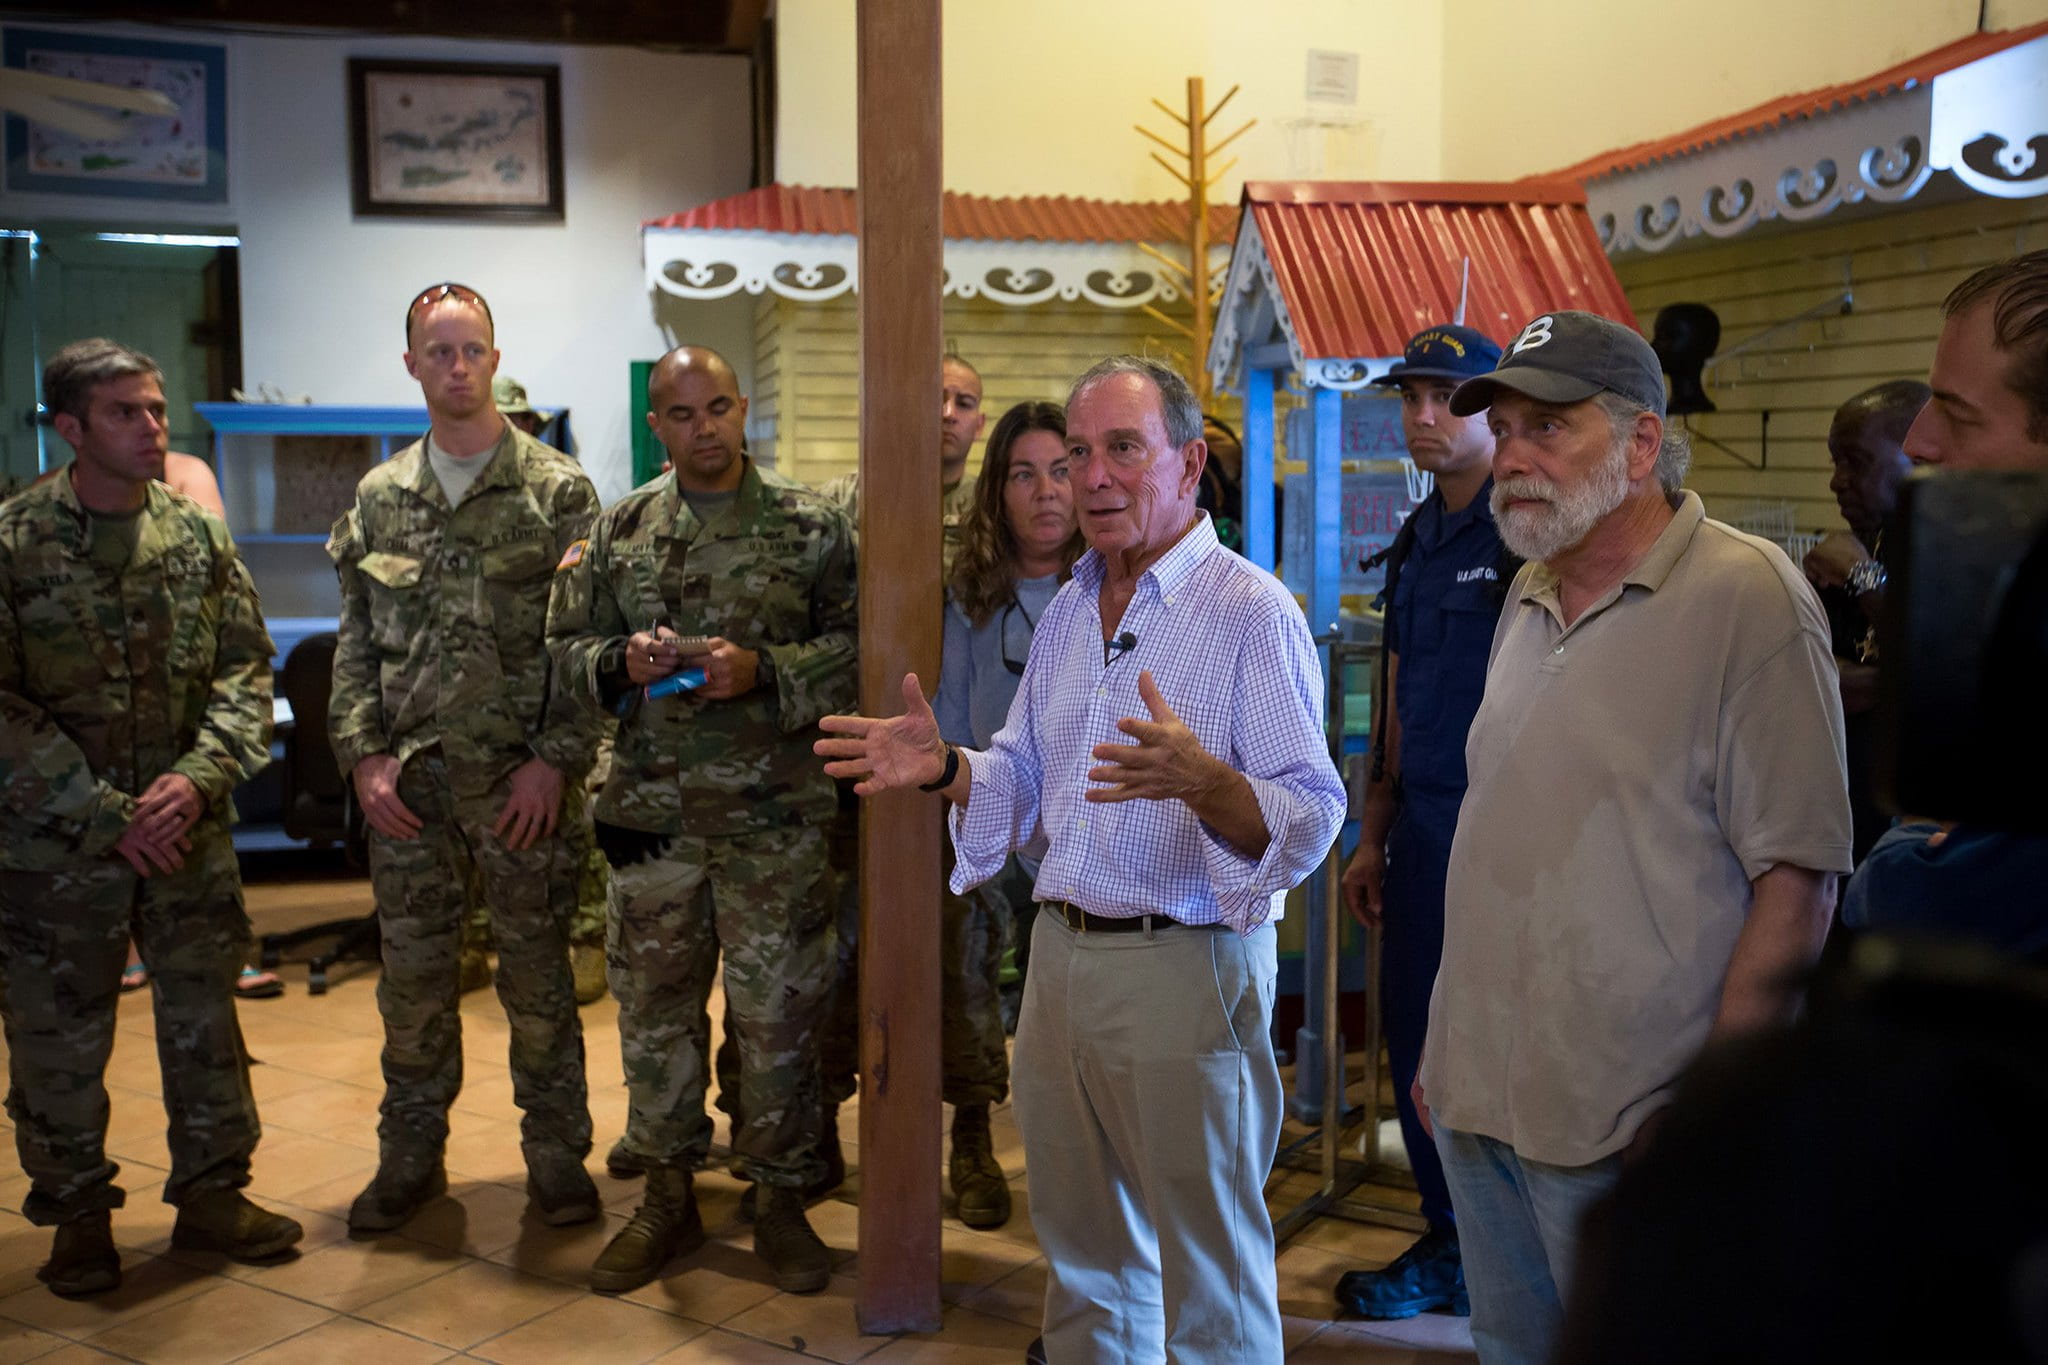 Mike Bloomberg speaks with local residents and troops in the U.S. Virgin Islands following Hurricanes Maria and Irma.